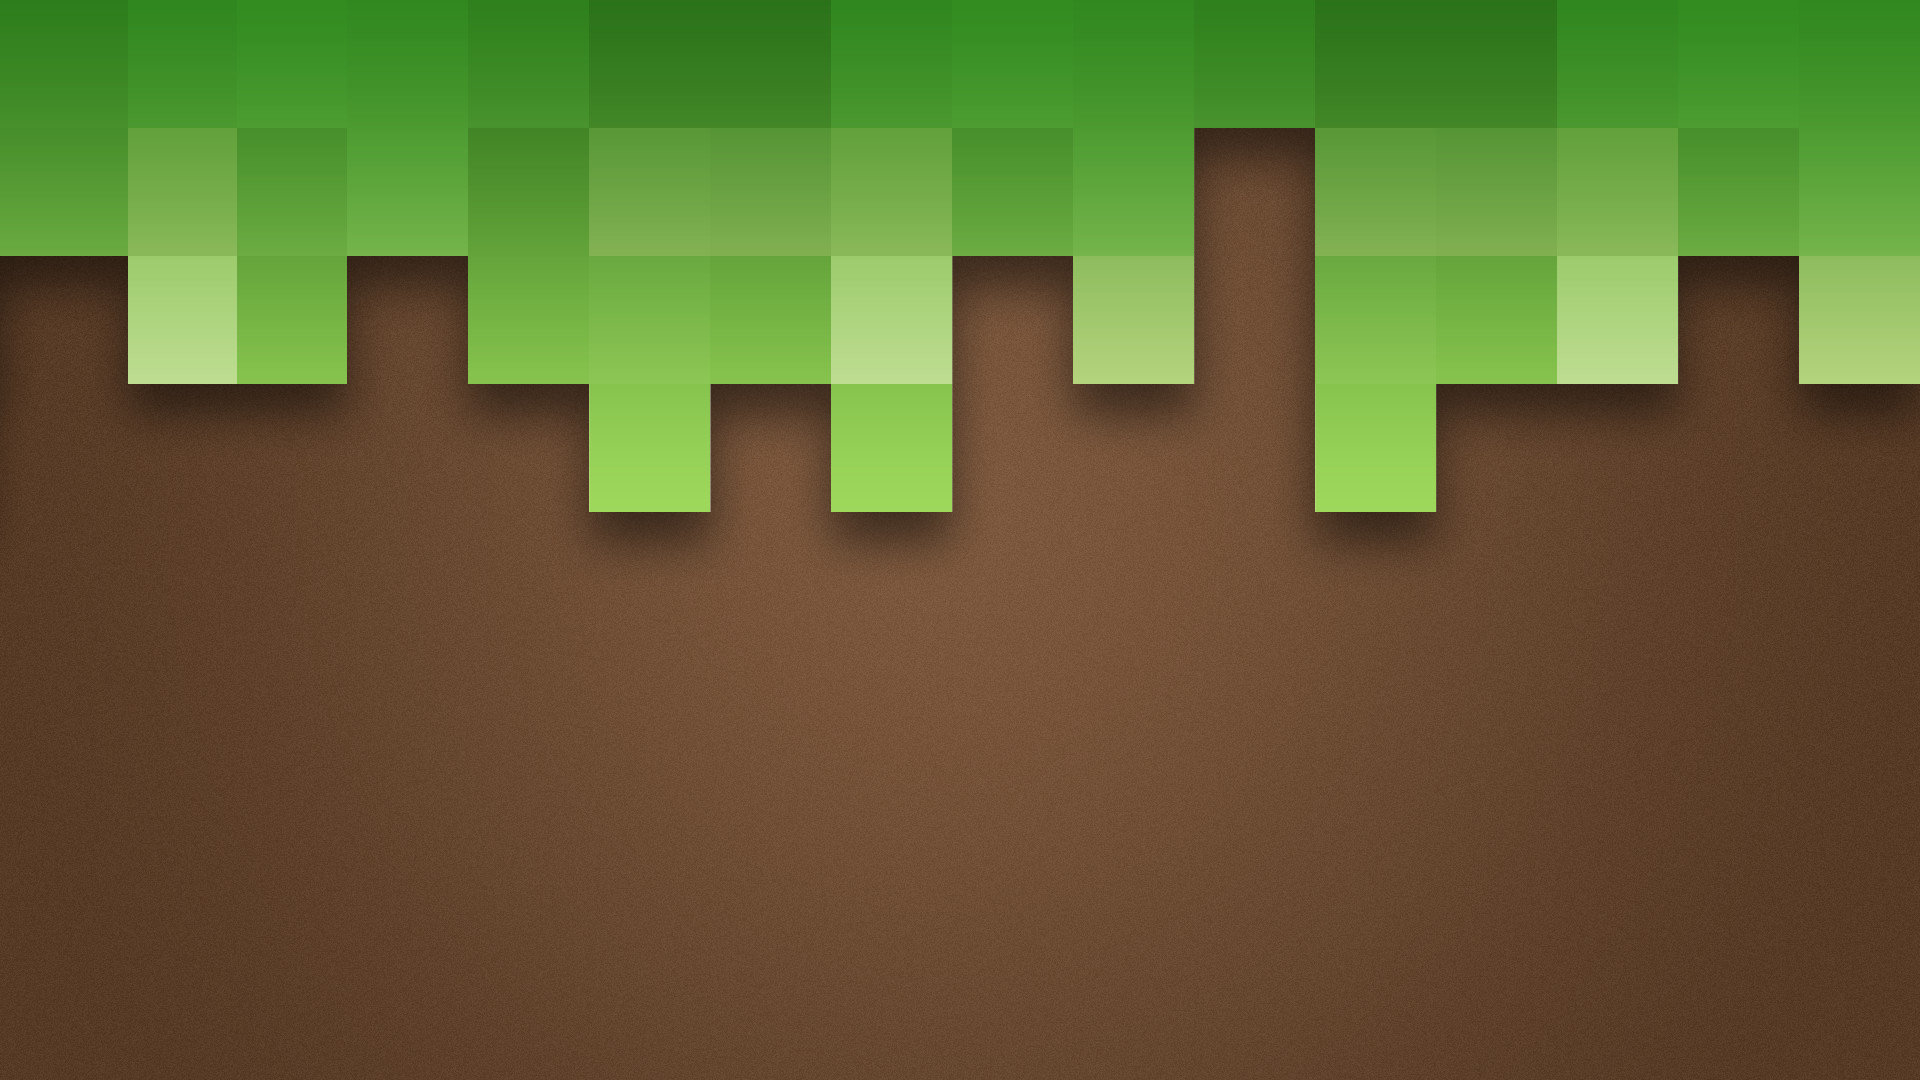 1920x1080 ... Minecraft Hd Wallpapers, 48 Free Minecraft Hd Wallpapers .